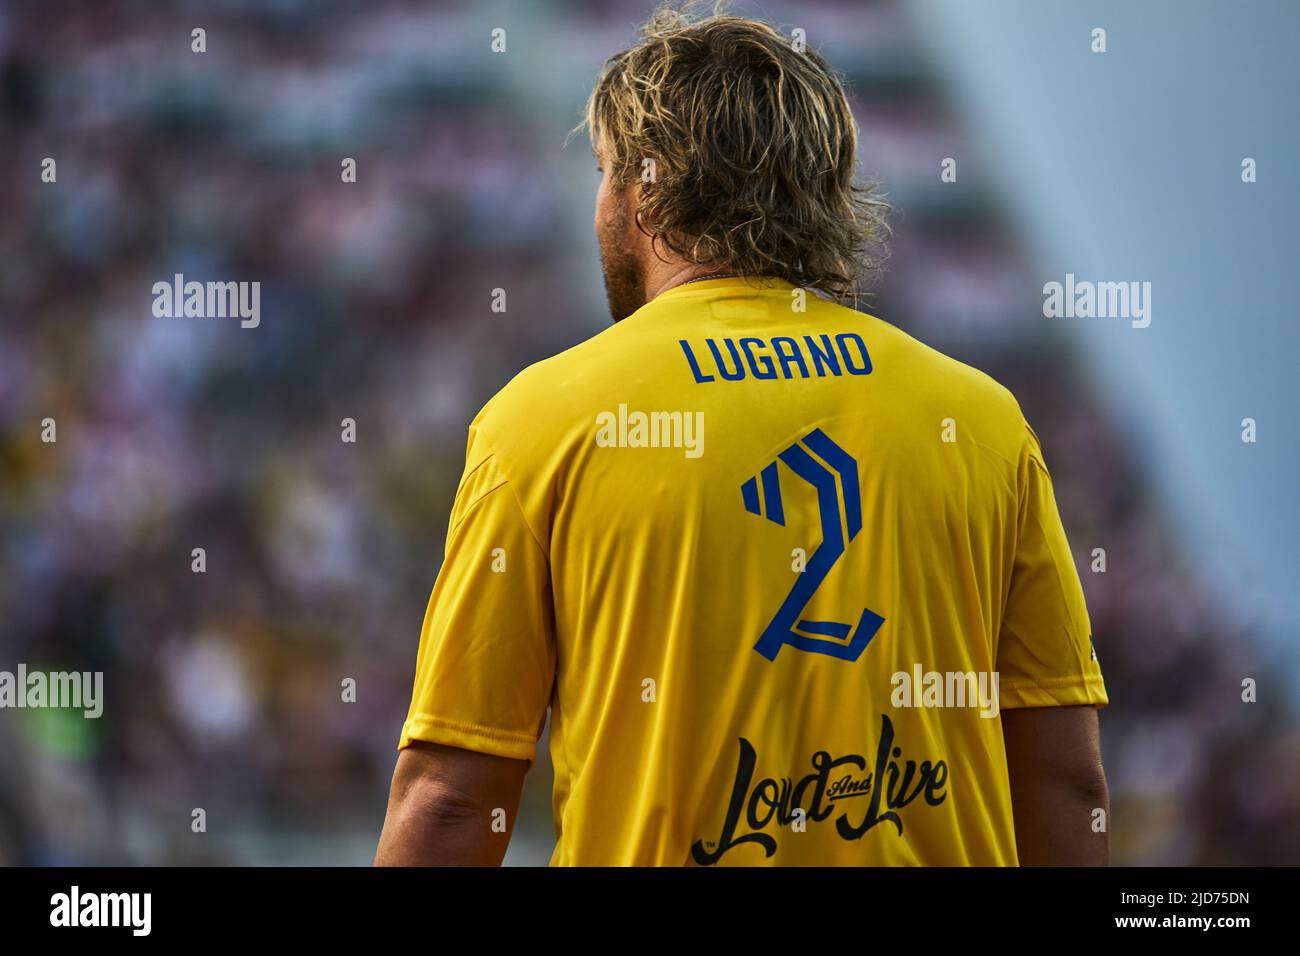 Fort Lauderdale, FL, USA. 18th June 2022. 2R - Diego Lugano - Former Uruguayan national team player during soccer match The Beautiful Game by R10 and RC3 owned global soccer football icons and Brazilian duo Ronaldinho and Roberto Carlos at DRV Pink Stadium in Florida, USA. Credit: Yaroslav Sabitov/YES Market Media/Alamy Live News. Stock Photo